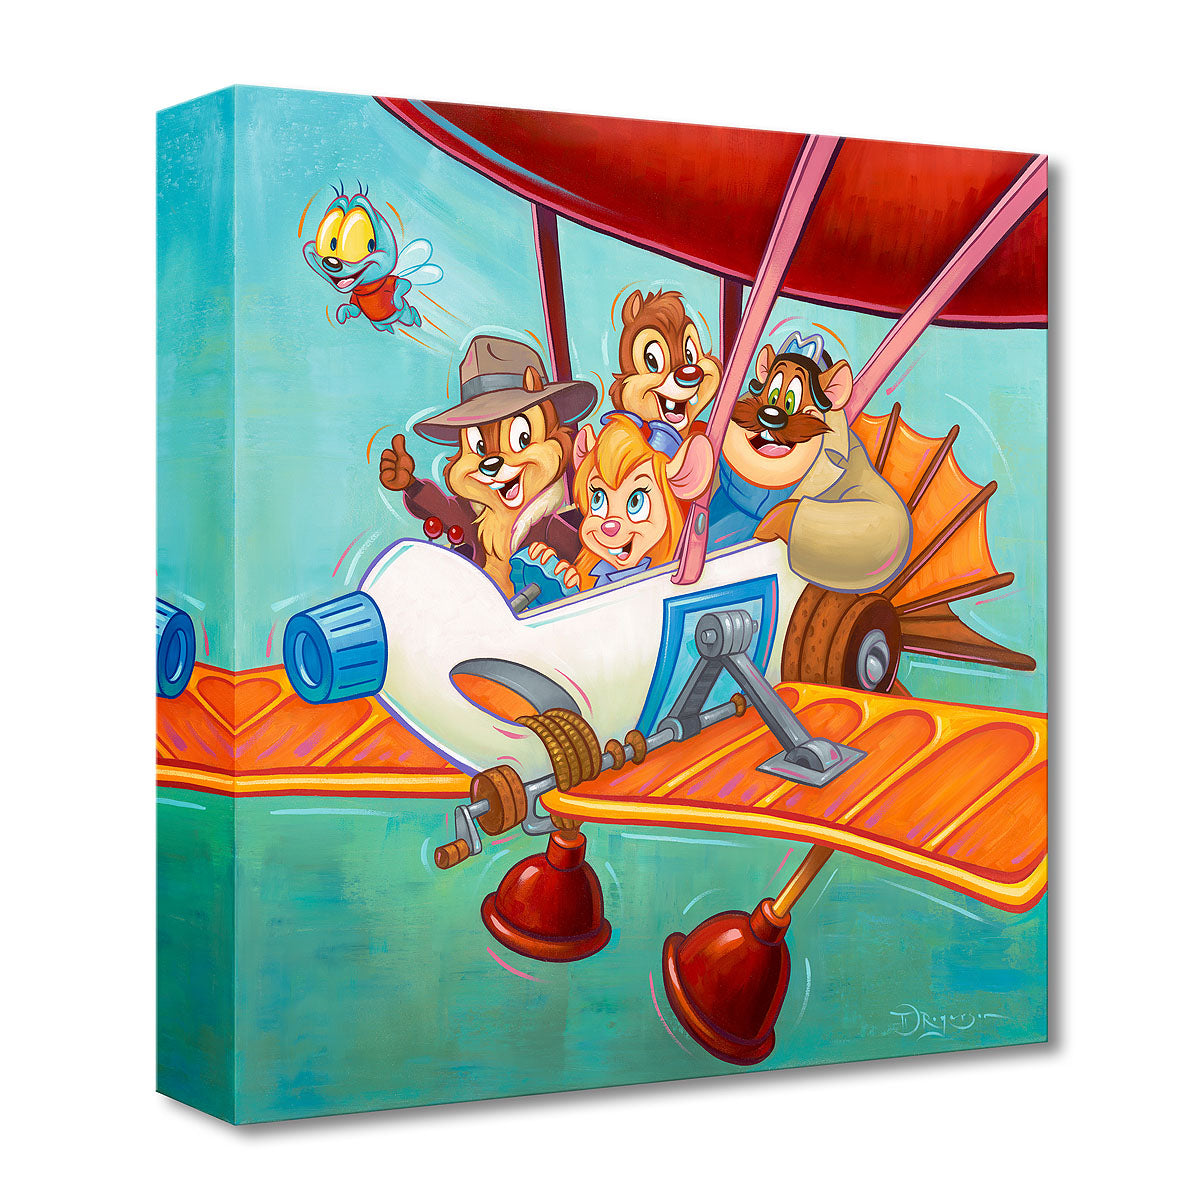 Chip and Dale Walt Disney Fine Art Tim Rogerson Limited Edition of 1500 Treasures on Canvas Print TOC "The Ranger Plane"